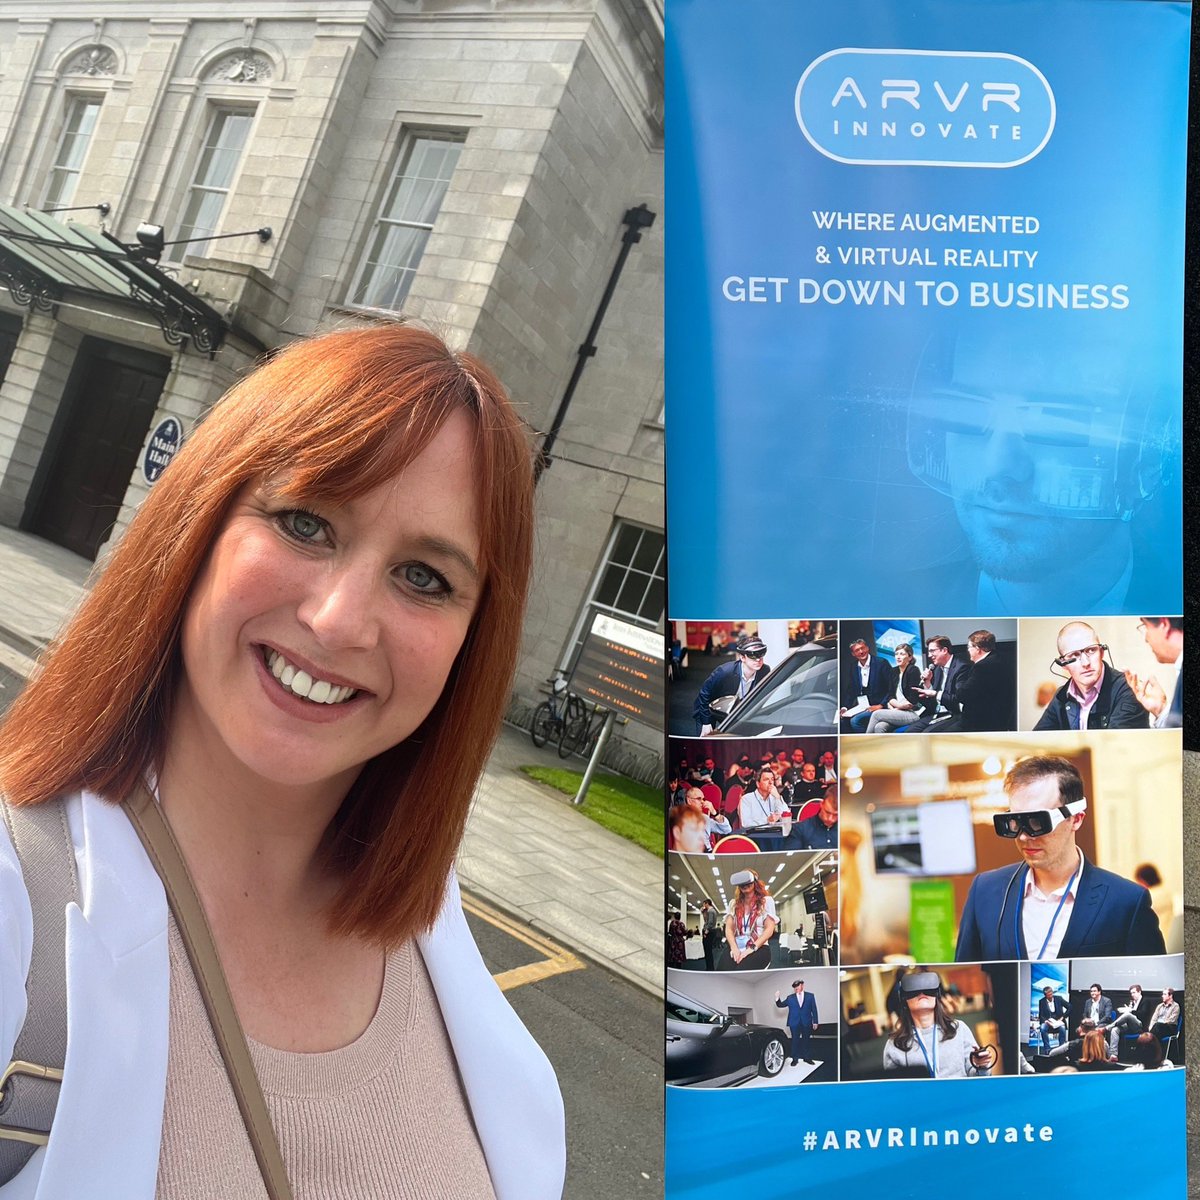 What joy to be speaking at the 11th @ARVRInnovate in Dublin in this glorious venue. I’ll be speaking shortly on AI and Hollywood and what we should all be learning from LaLaLand. #arvrinnovate #AI